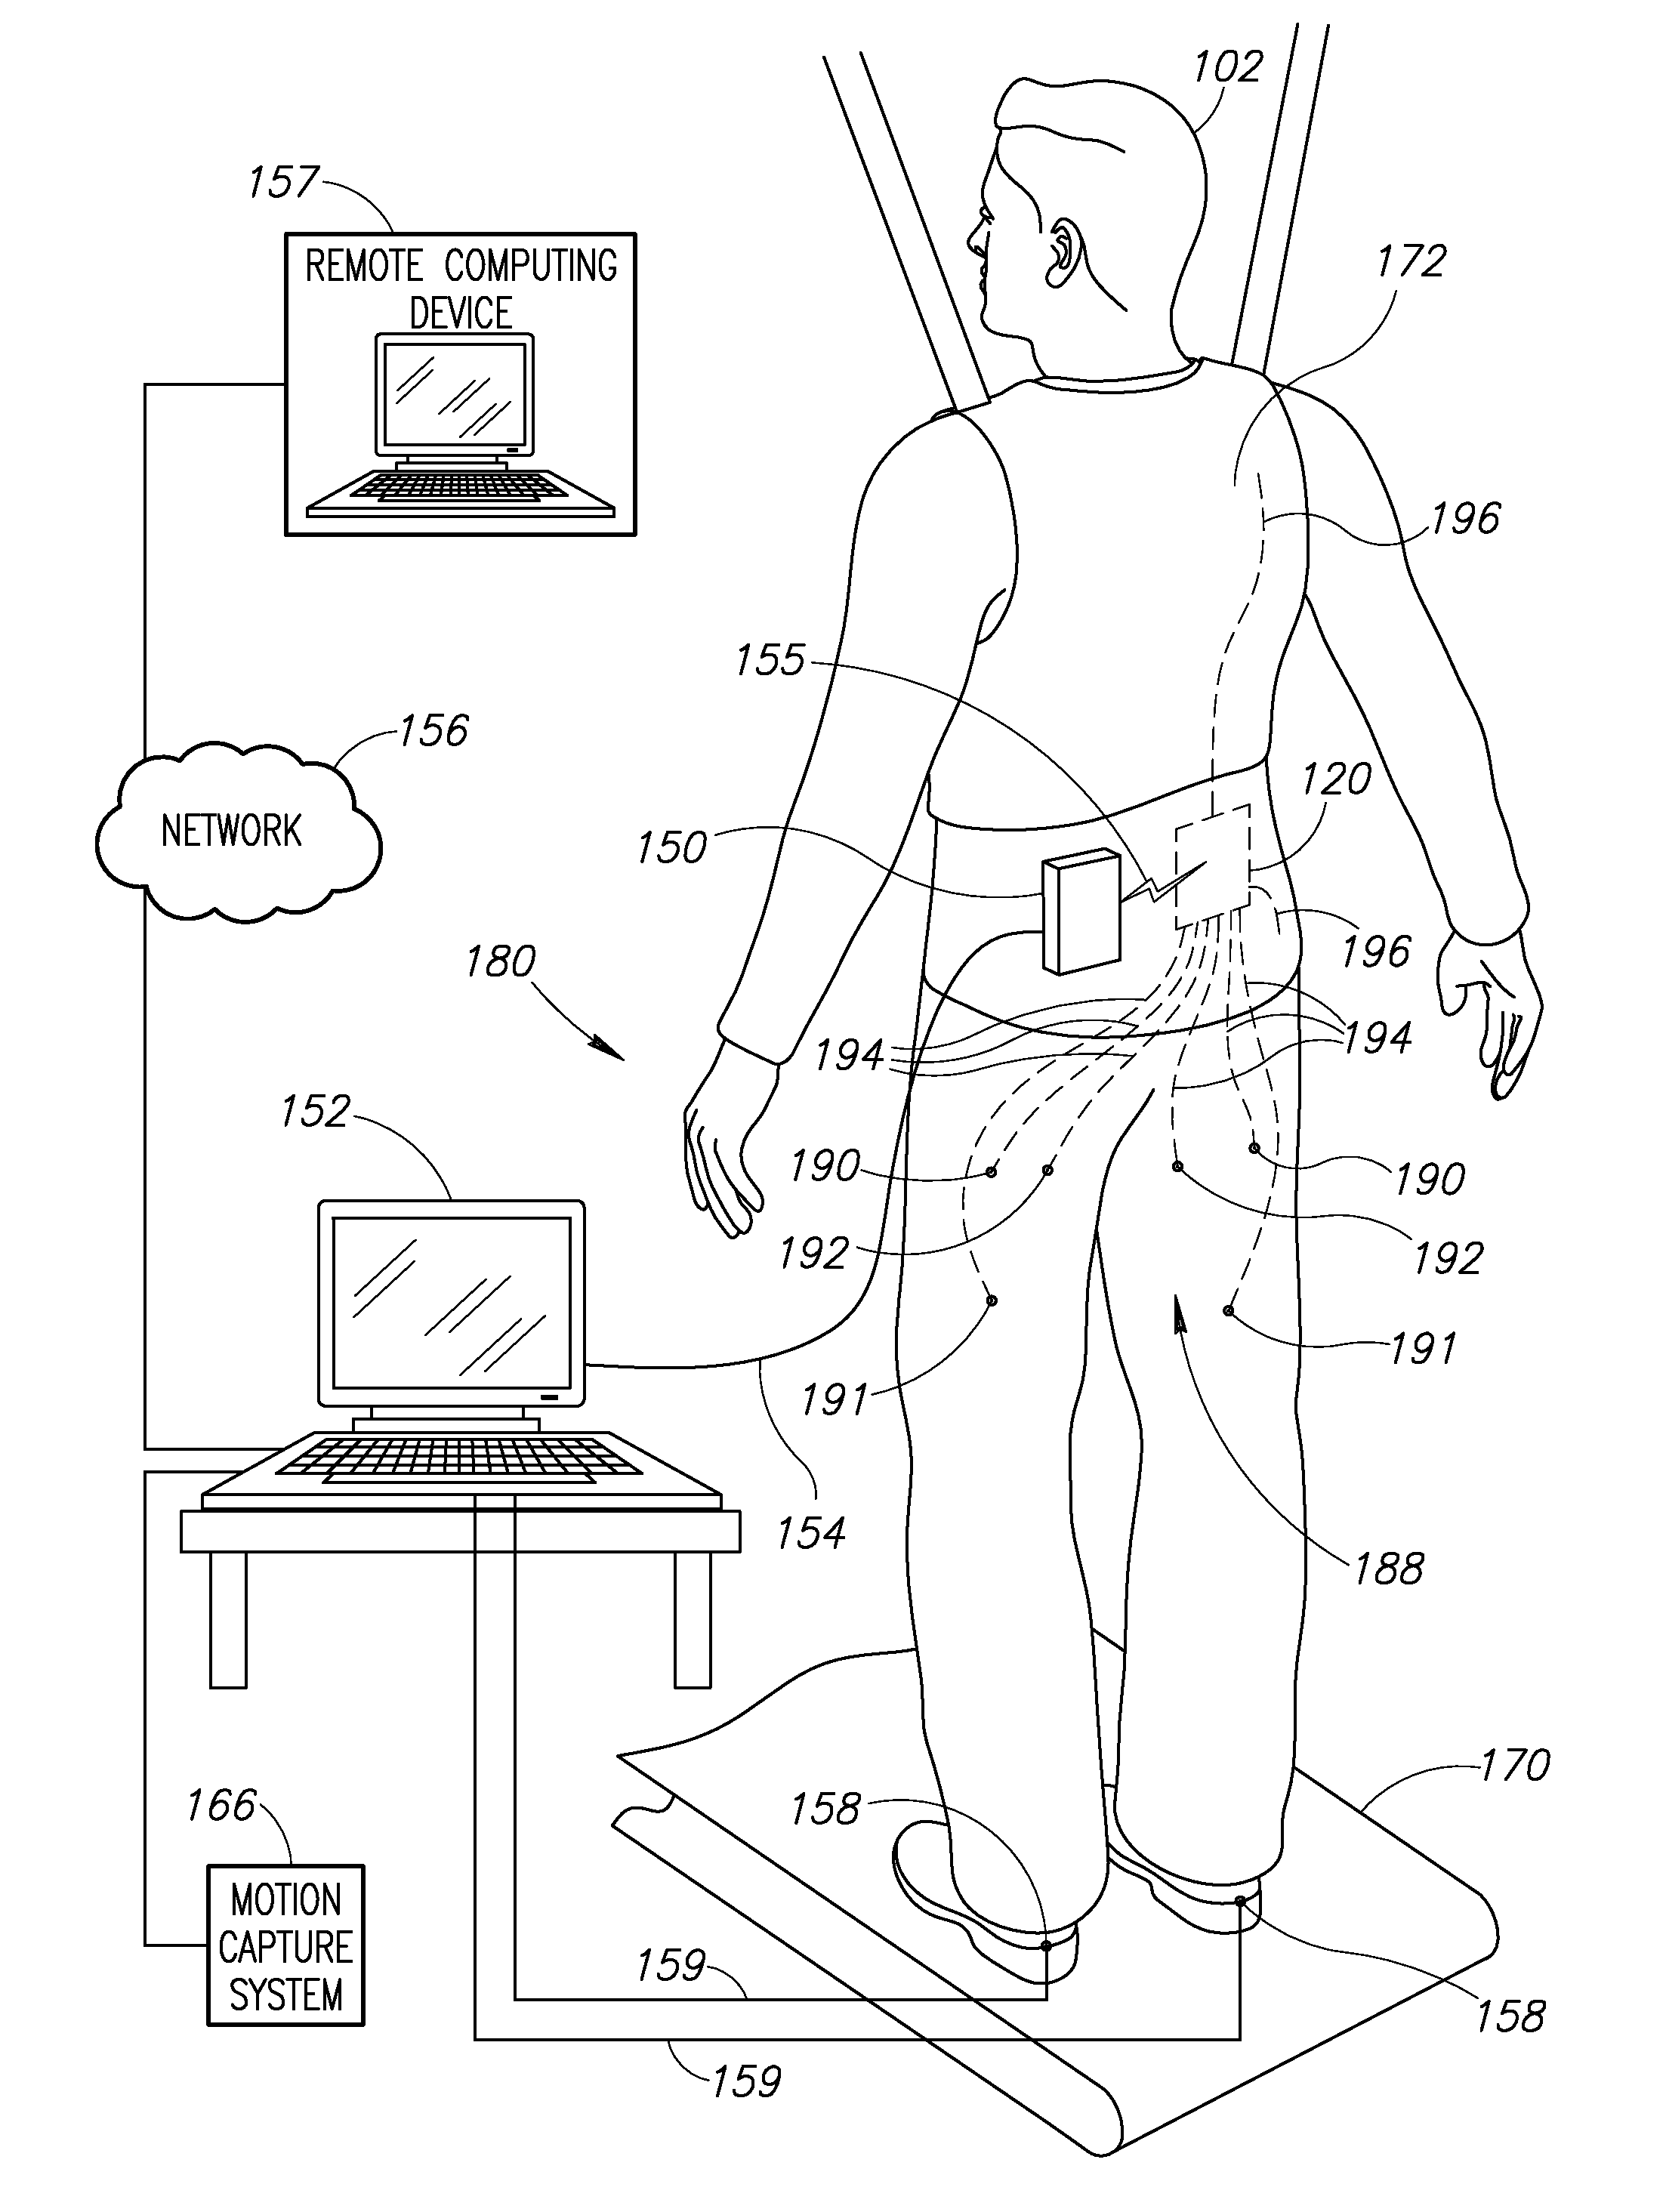 Spinal stimulator systems for restoration of function